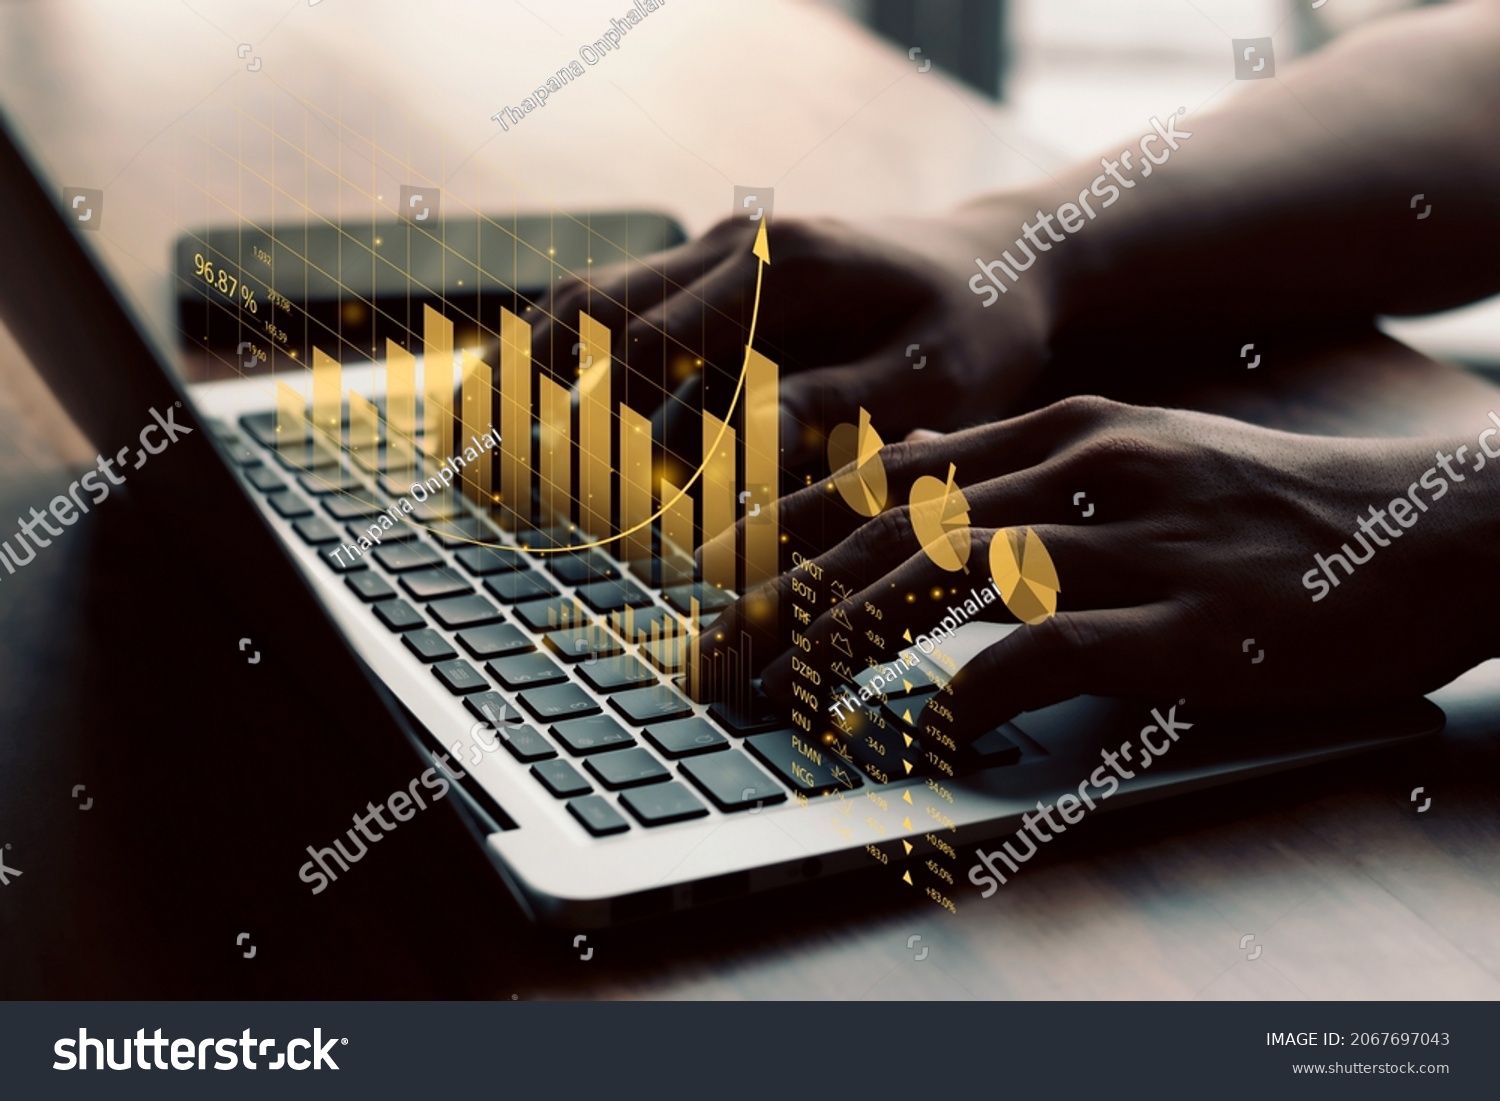 Business people analyze financial data chart trading forex, investing in stock markets, funds and digital assets, Business finance technology and investment concept, Business finance background. #2067697043